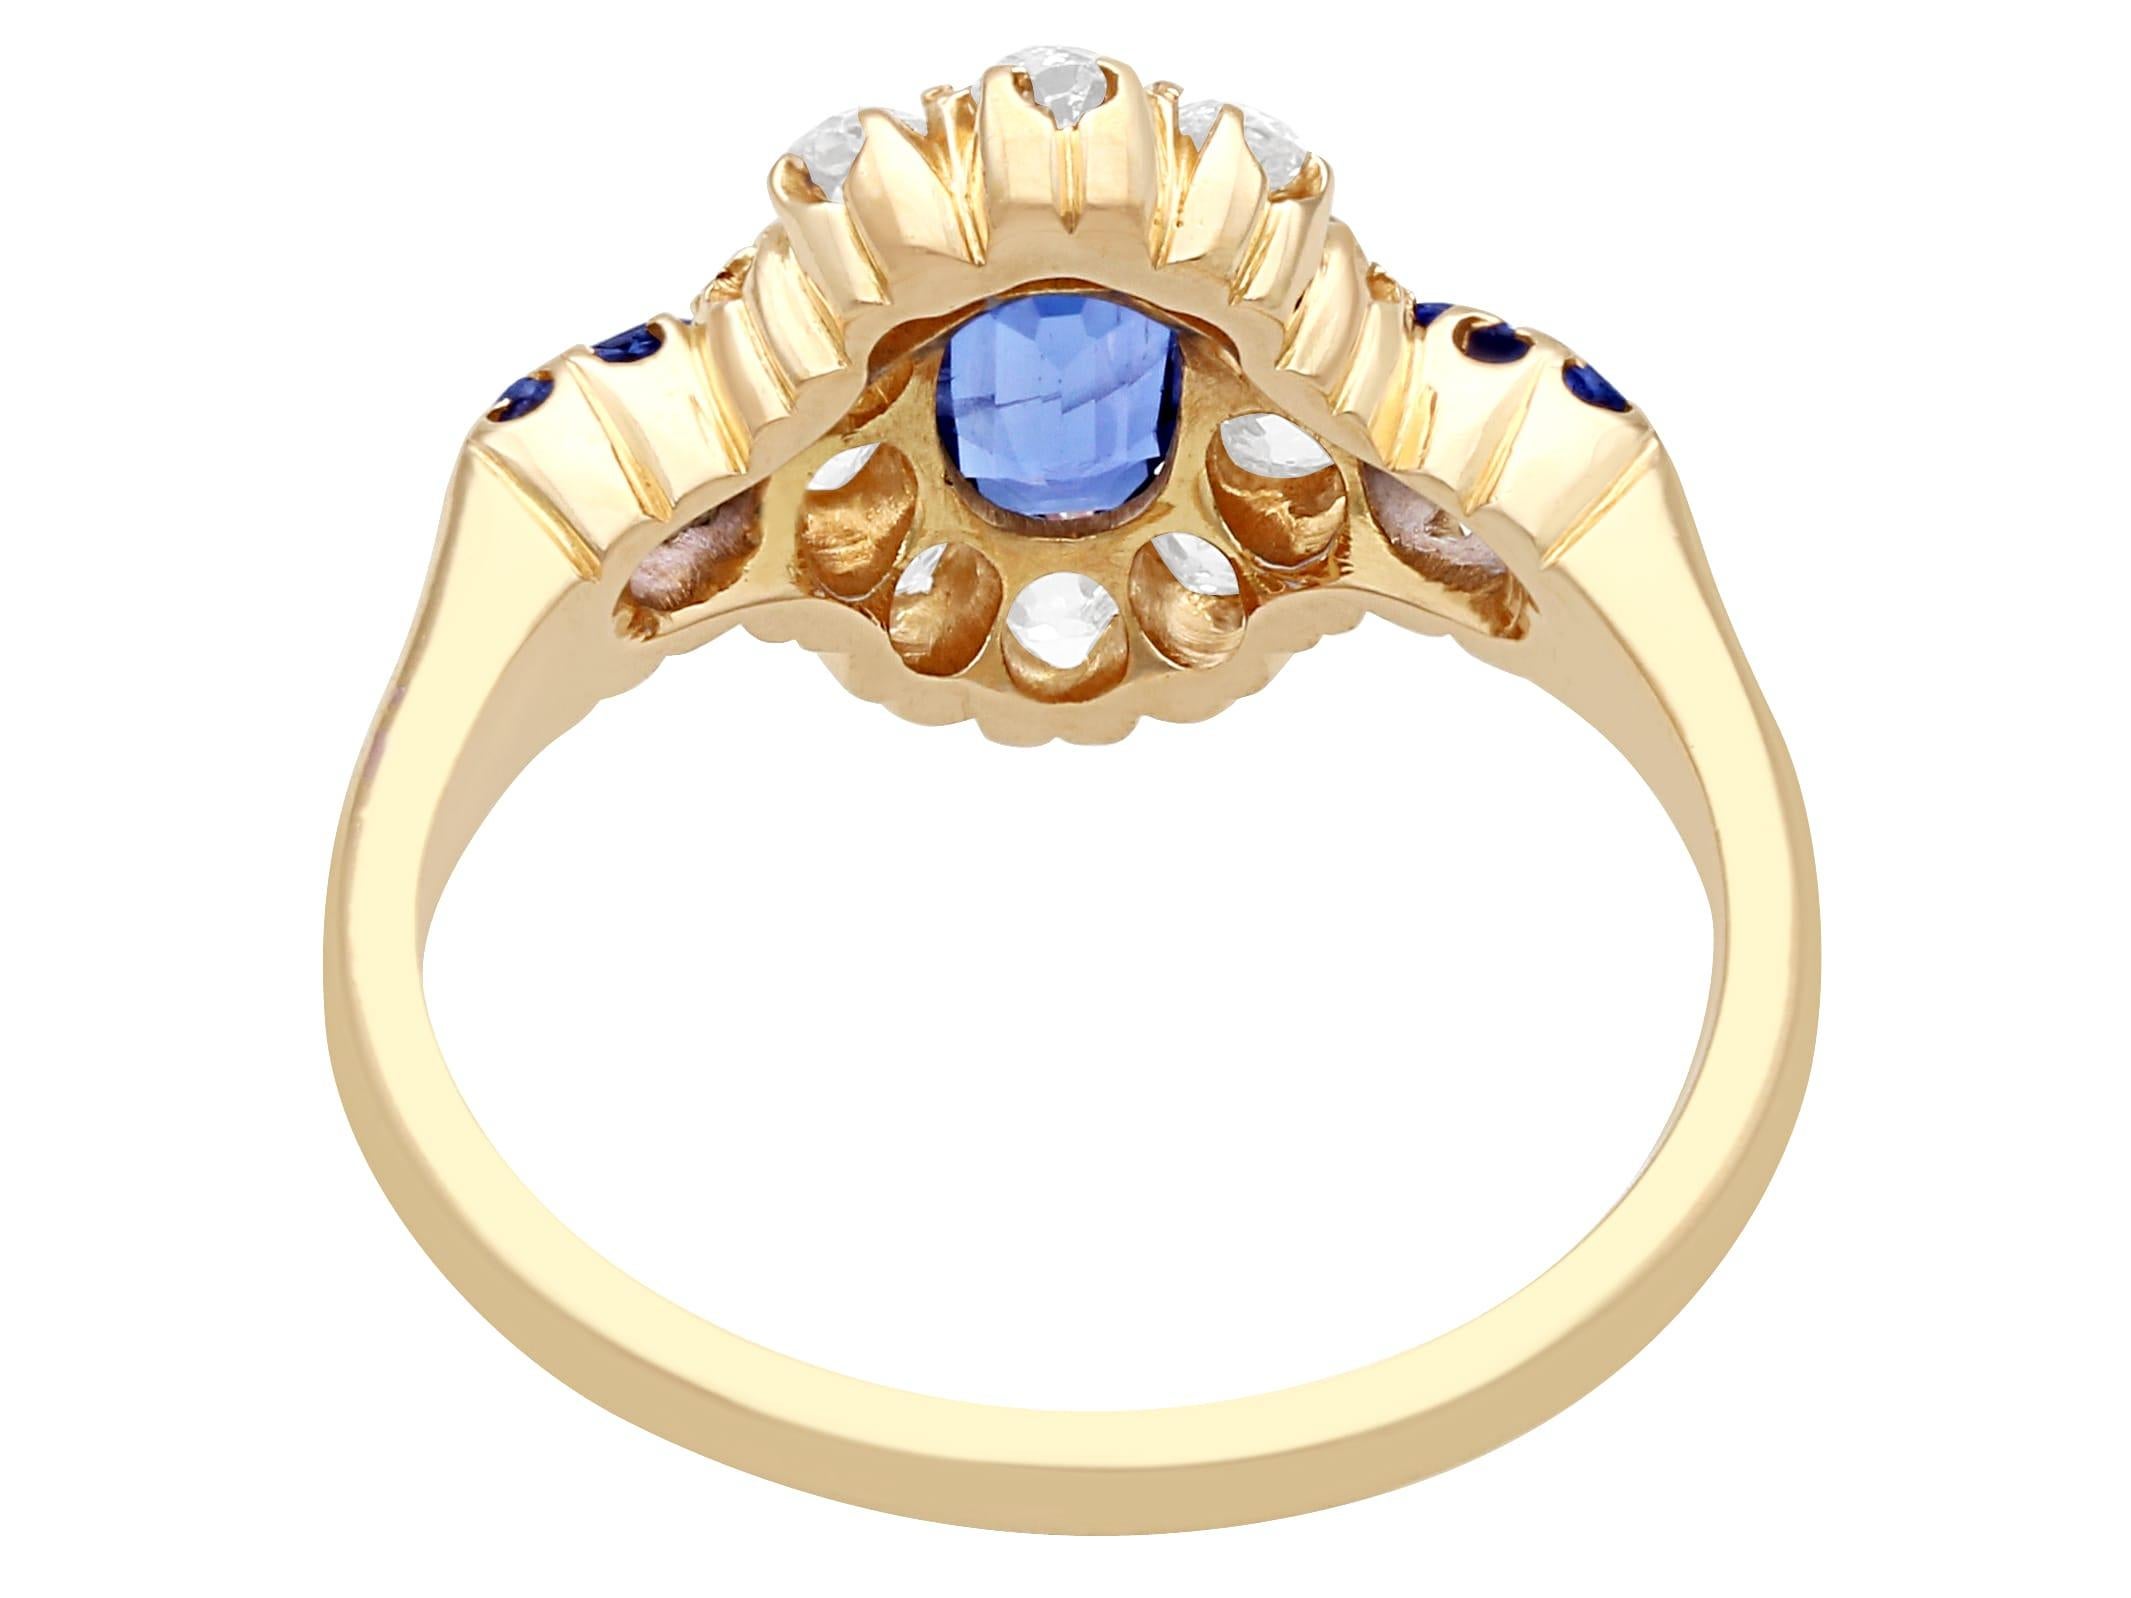 1900s Oval Cut Sapphire and Diamond 18K Yellow Gold Cocktail Ring In Excellent Condition For Sale In Jesmond, Newcastle Upon Tyne